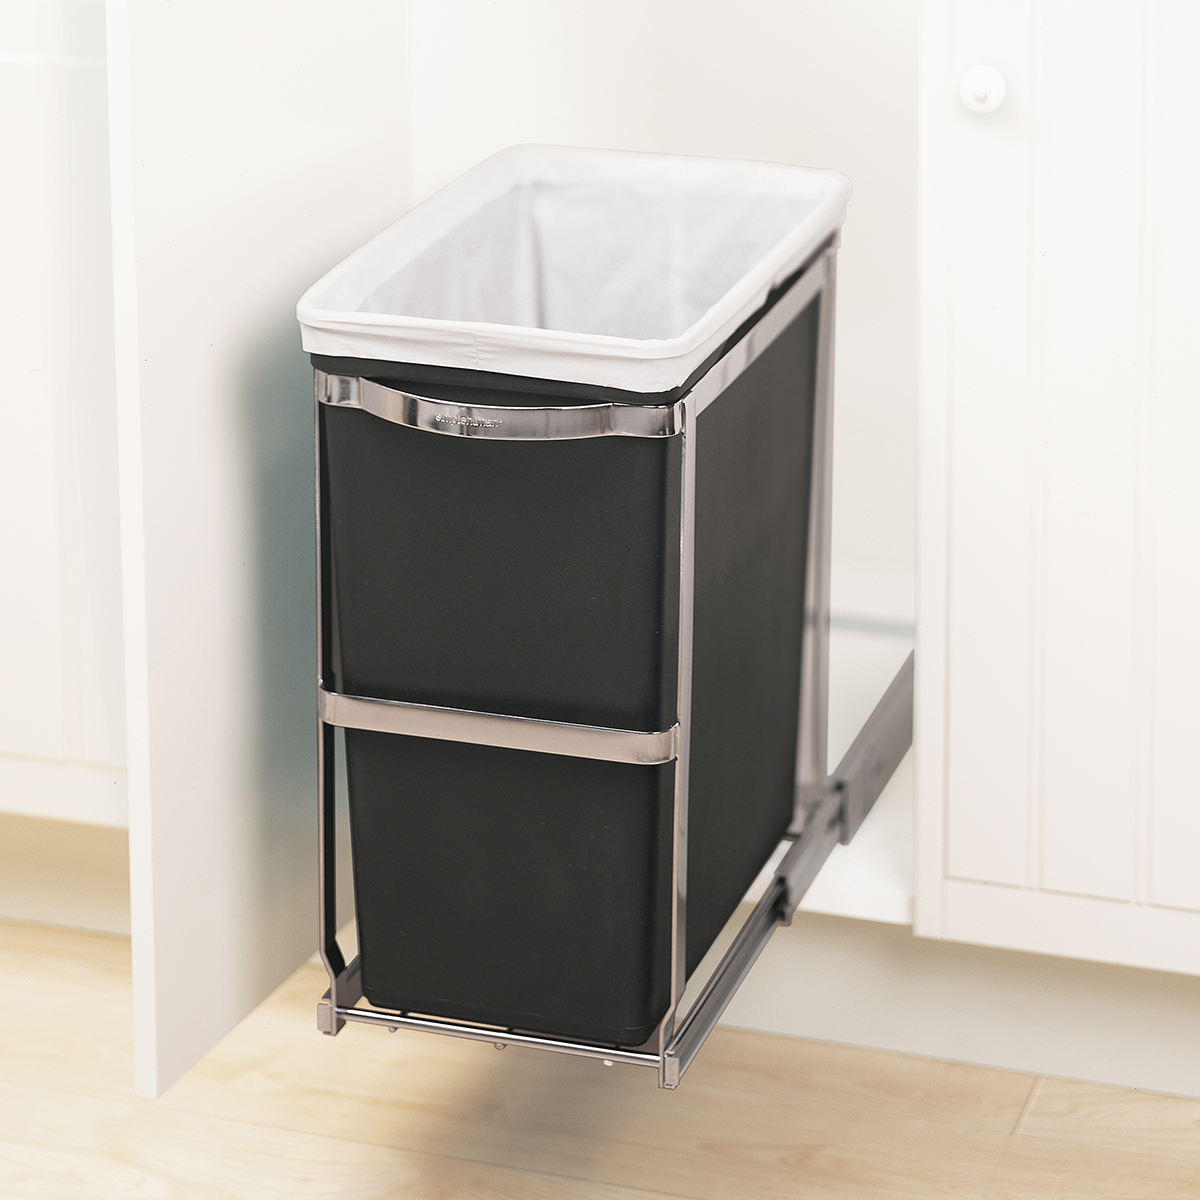 https://www.containerstore.com/catalogimages/378516/10059562-SH-8gal-trash-can-VEN3.jpg